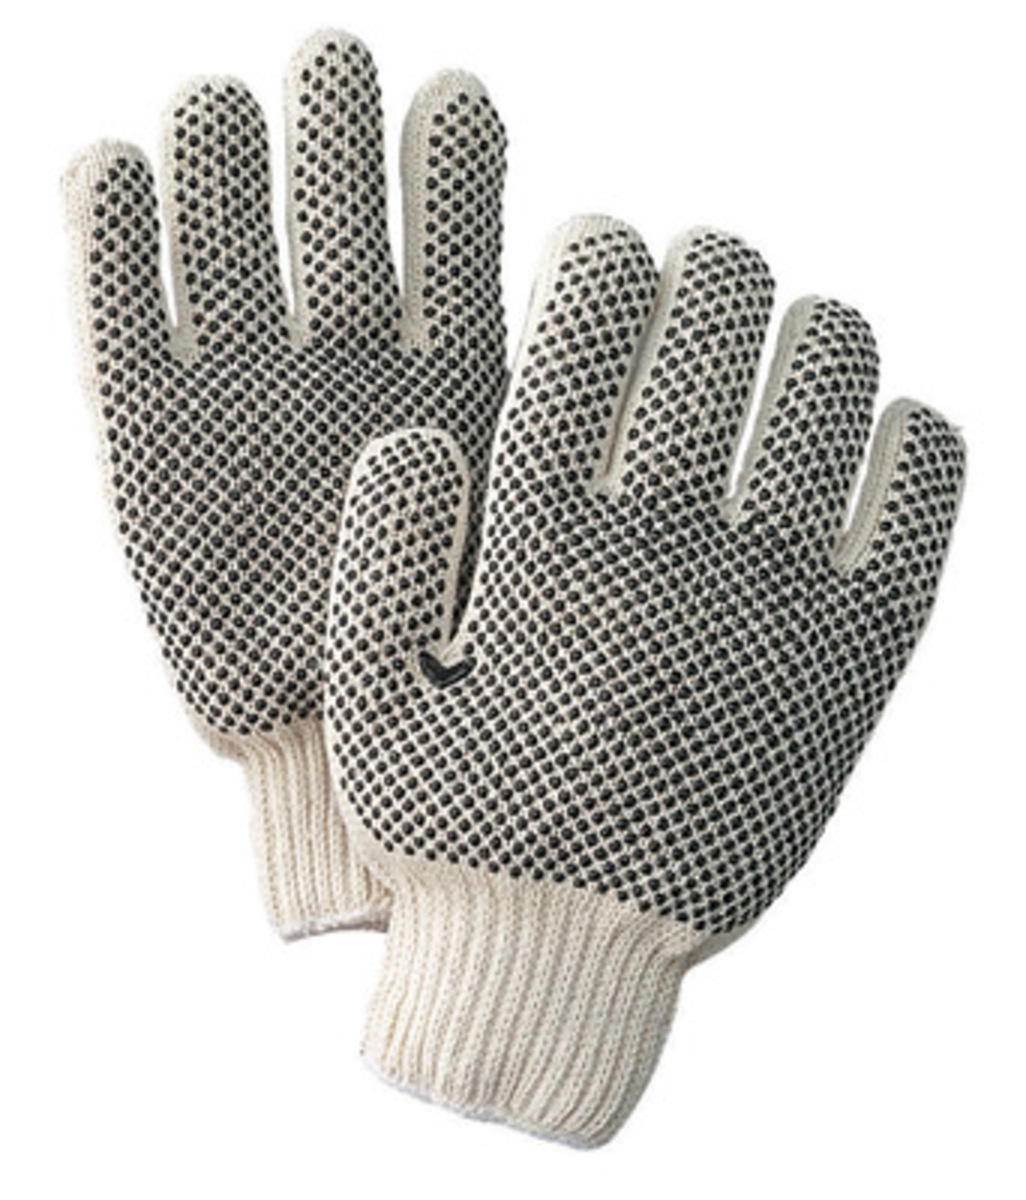 RADNOR® Black/Natural Large Medium Weight Cotton And Polyester Seamless Knit General Purpose Gloves With Knit Wrist